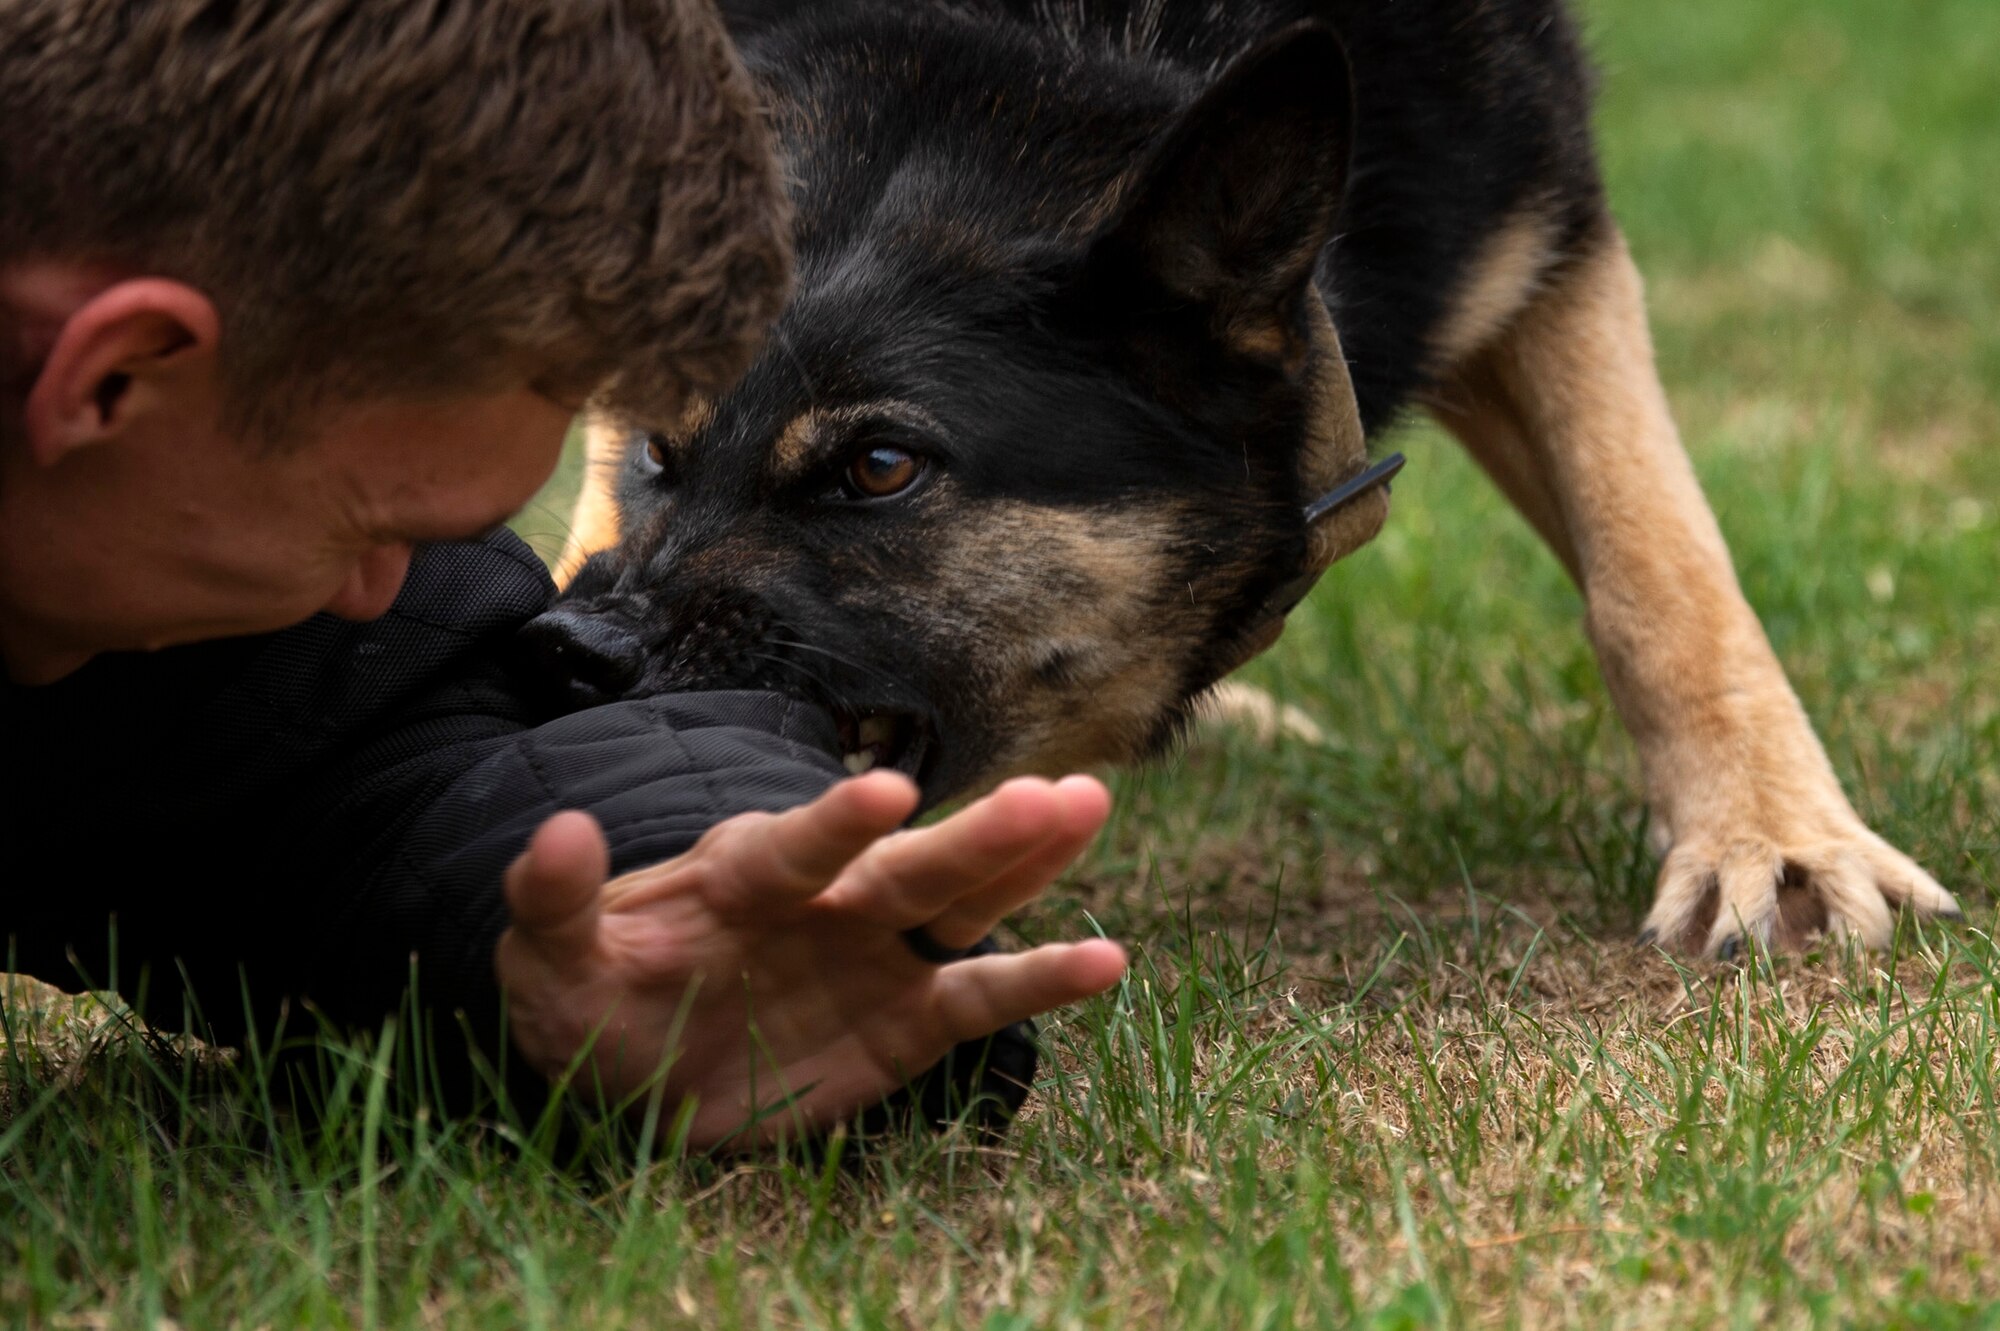 U.S. Air Force Staff Sgt. Jordan Leiter, 52nd Security Forces Squadron military working dog trainer, and Tina, an MWD, conduct training at Spangdahlem Air Base, Germany, Aug. 1, 2019. MWDs are trained to react to body language and understand their handler's commands. (U.S. Air Force photo by Airman 1st Class Valerie Seelye)